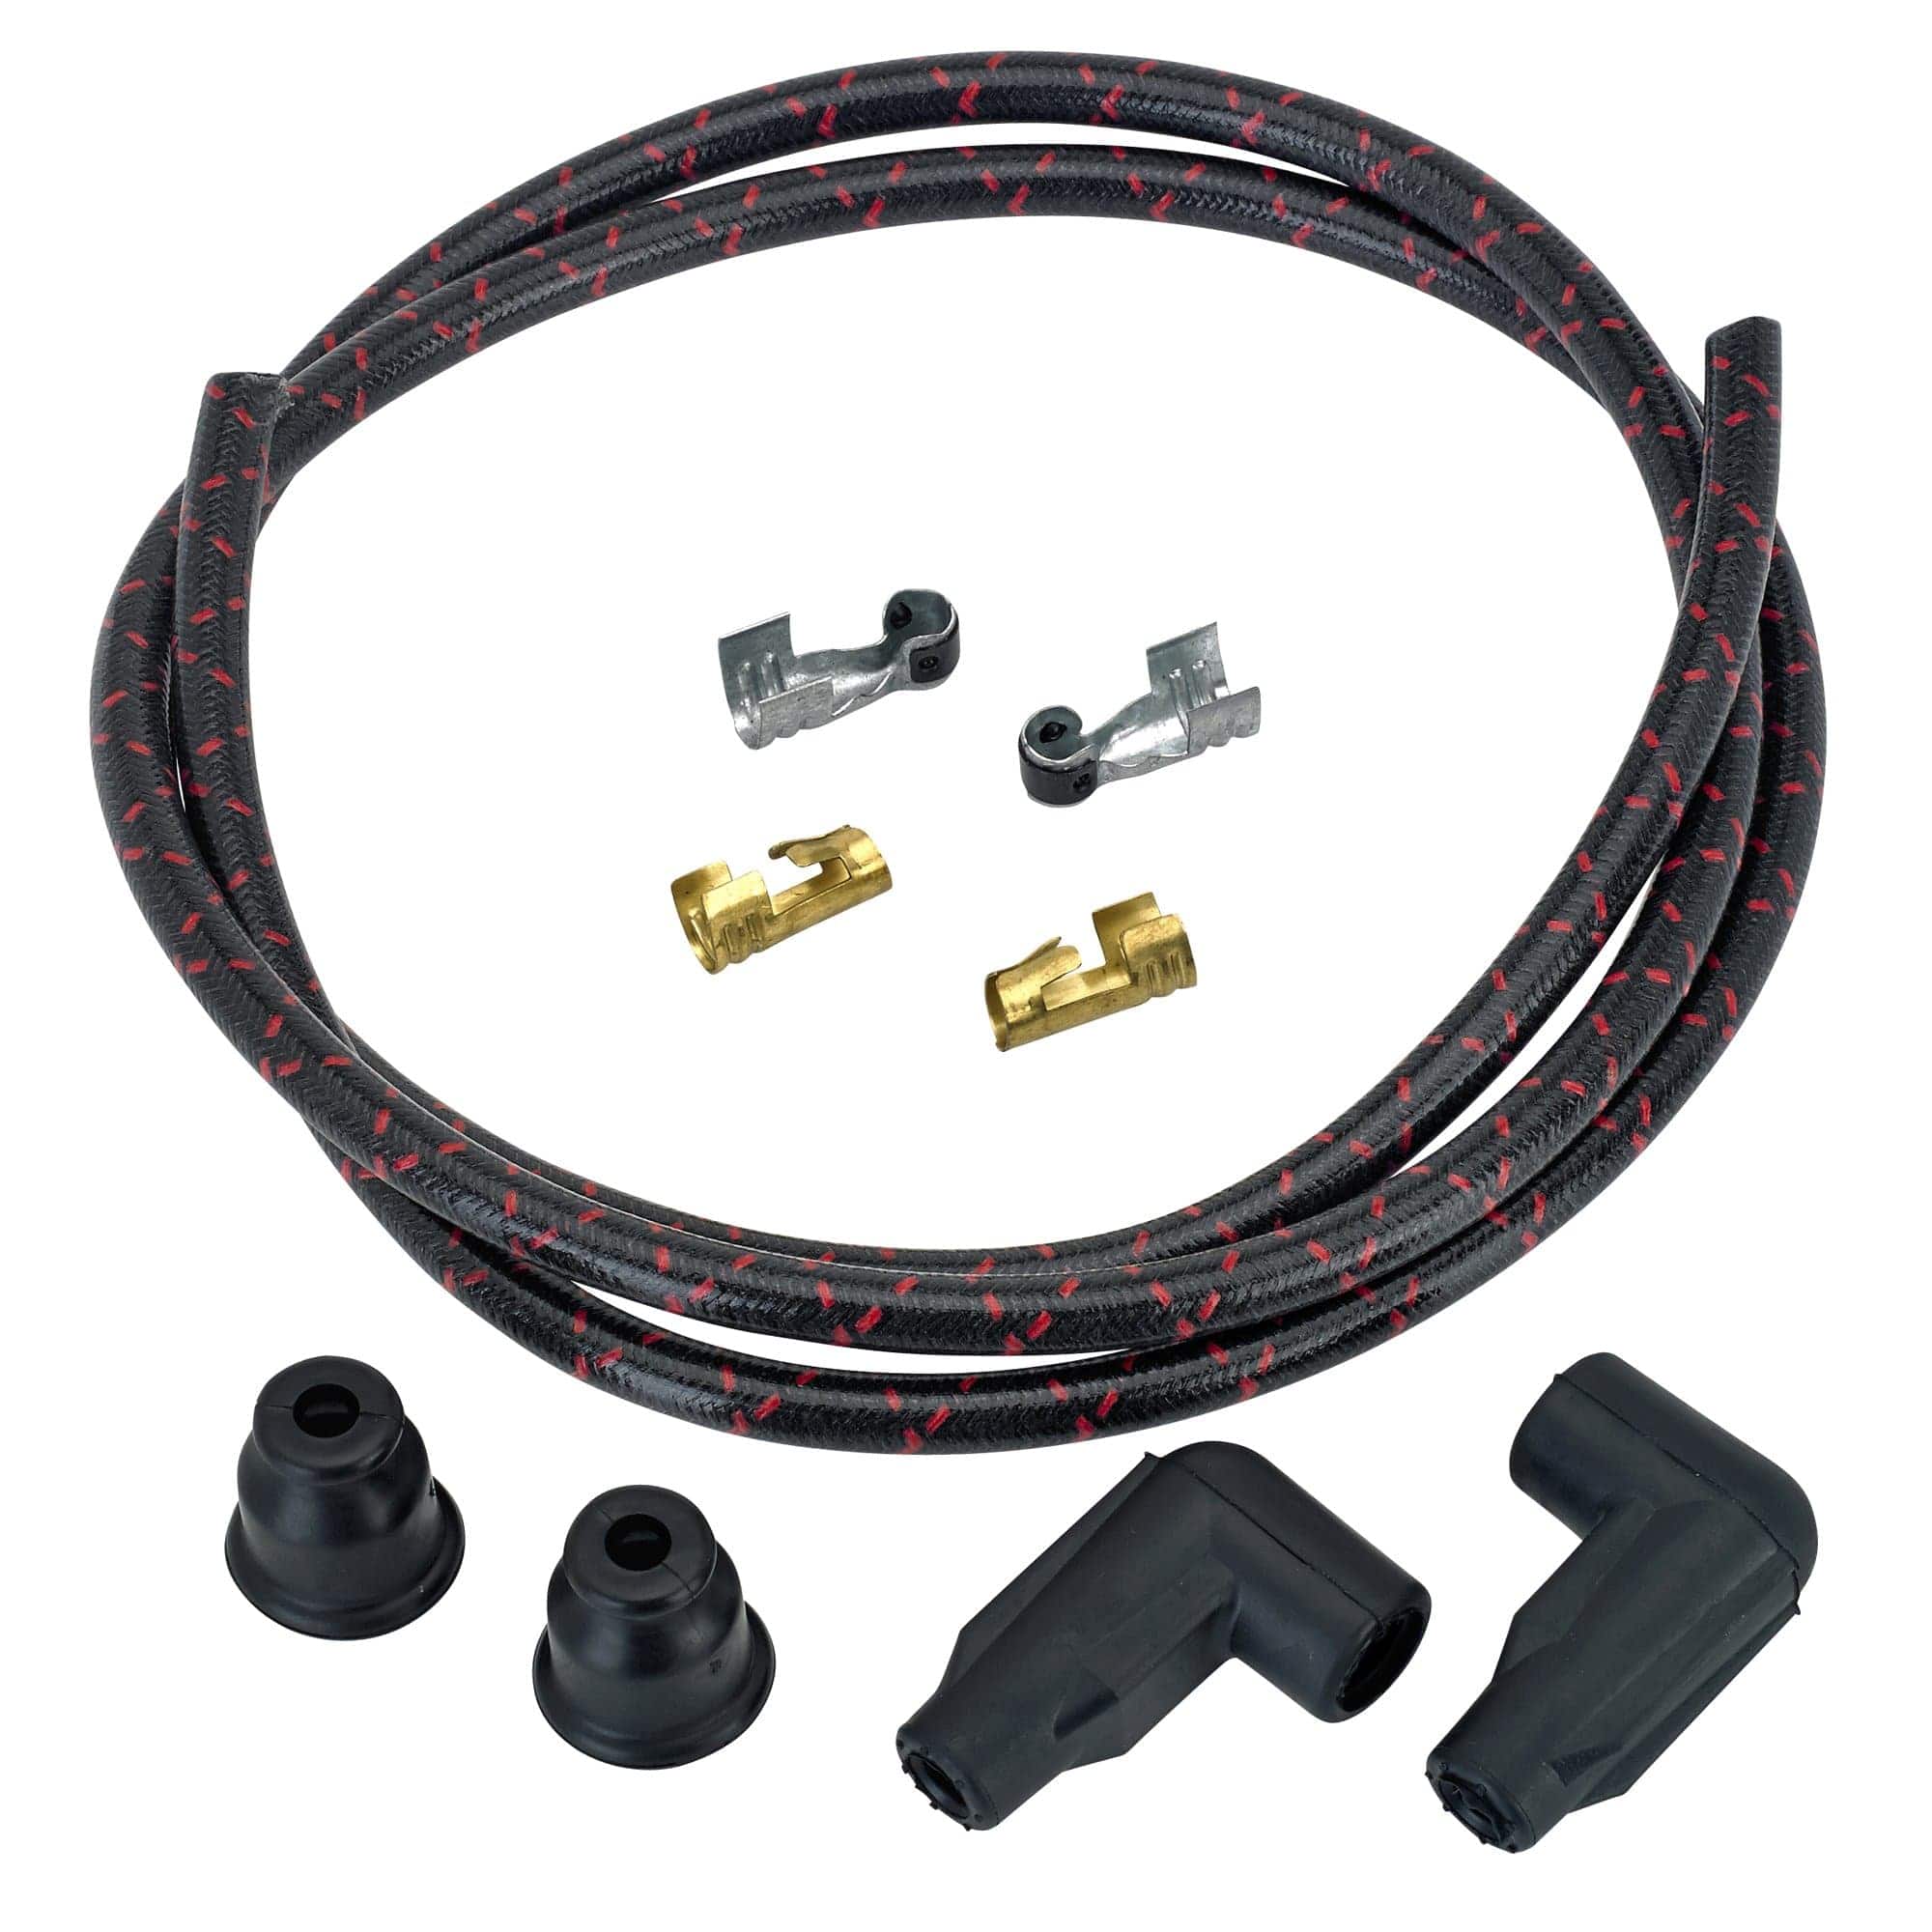 https://www.lowbrowcustoms.com/cdn/shop/products/large_3676_lowbrow-customs-8-mm-supressor-core-spark-plug-wire-kit-black-red-tracers_2_2000x.jpg?v=1622524555